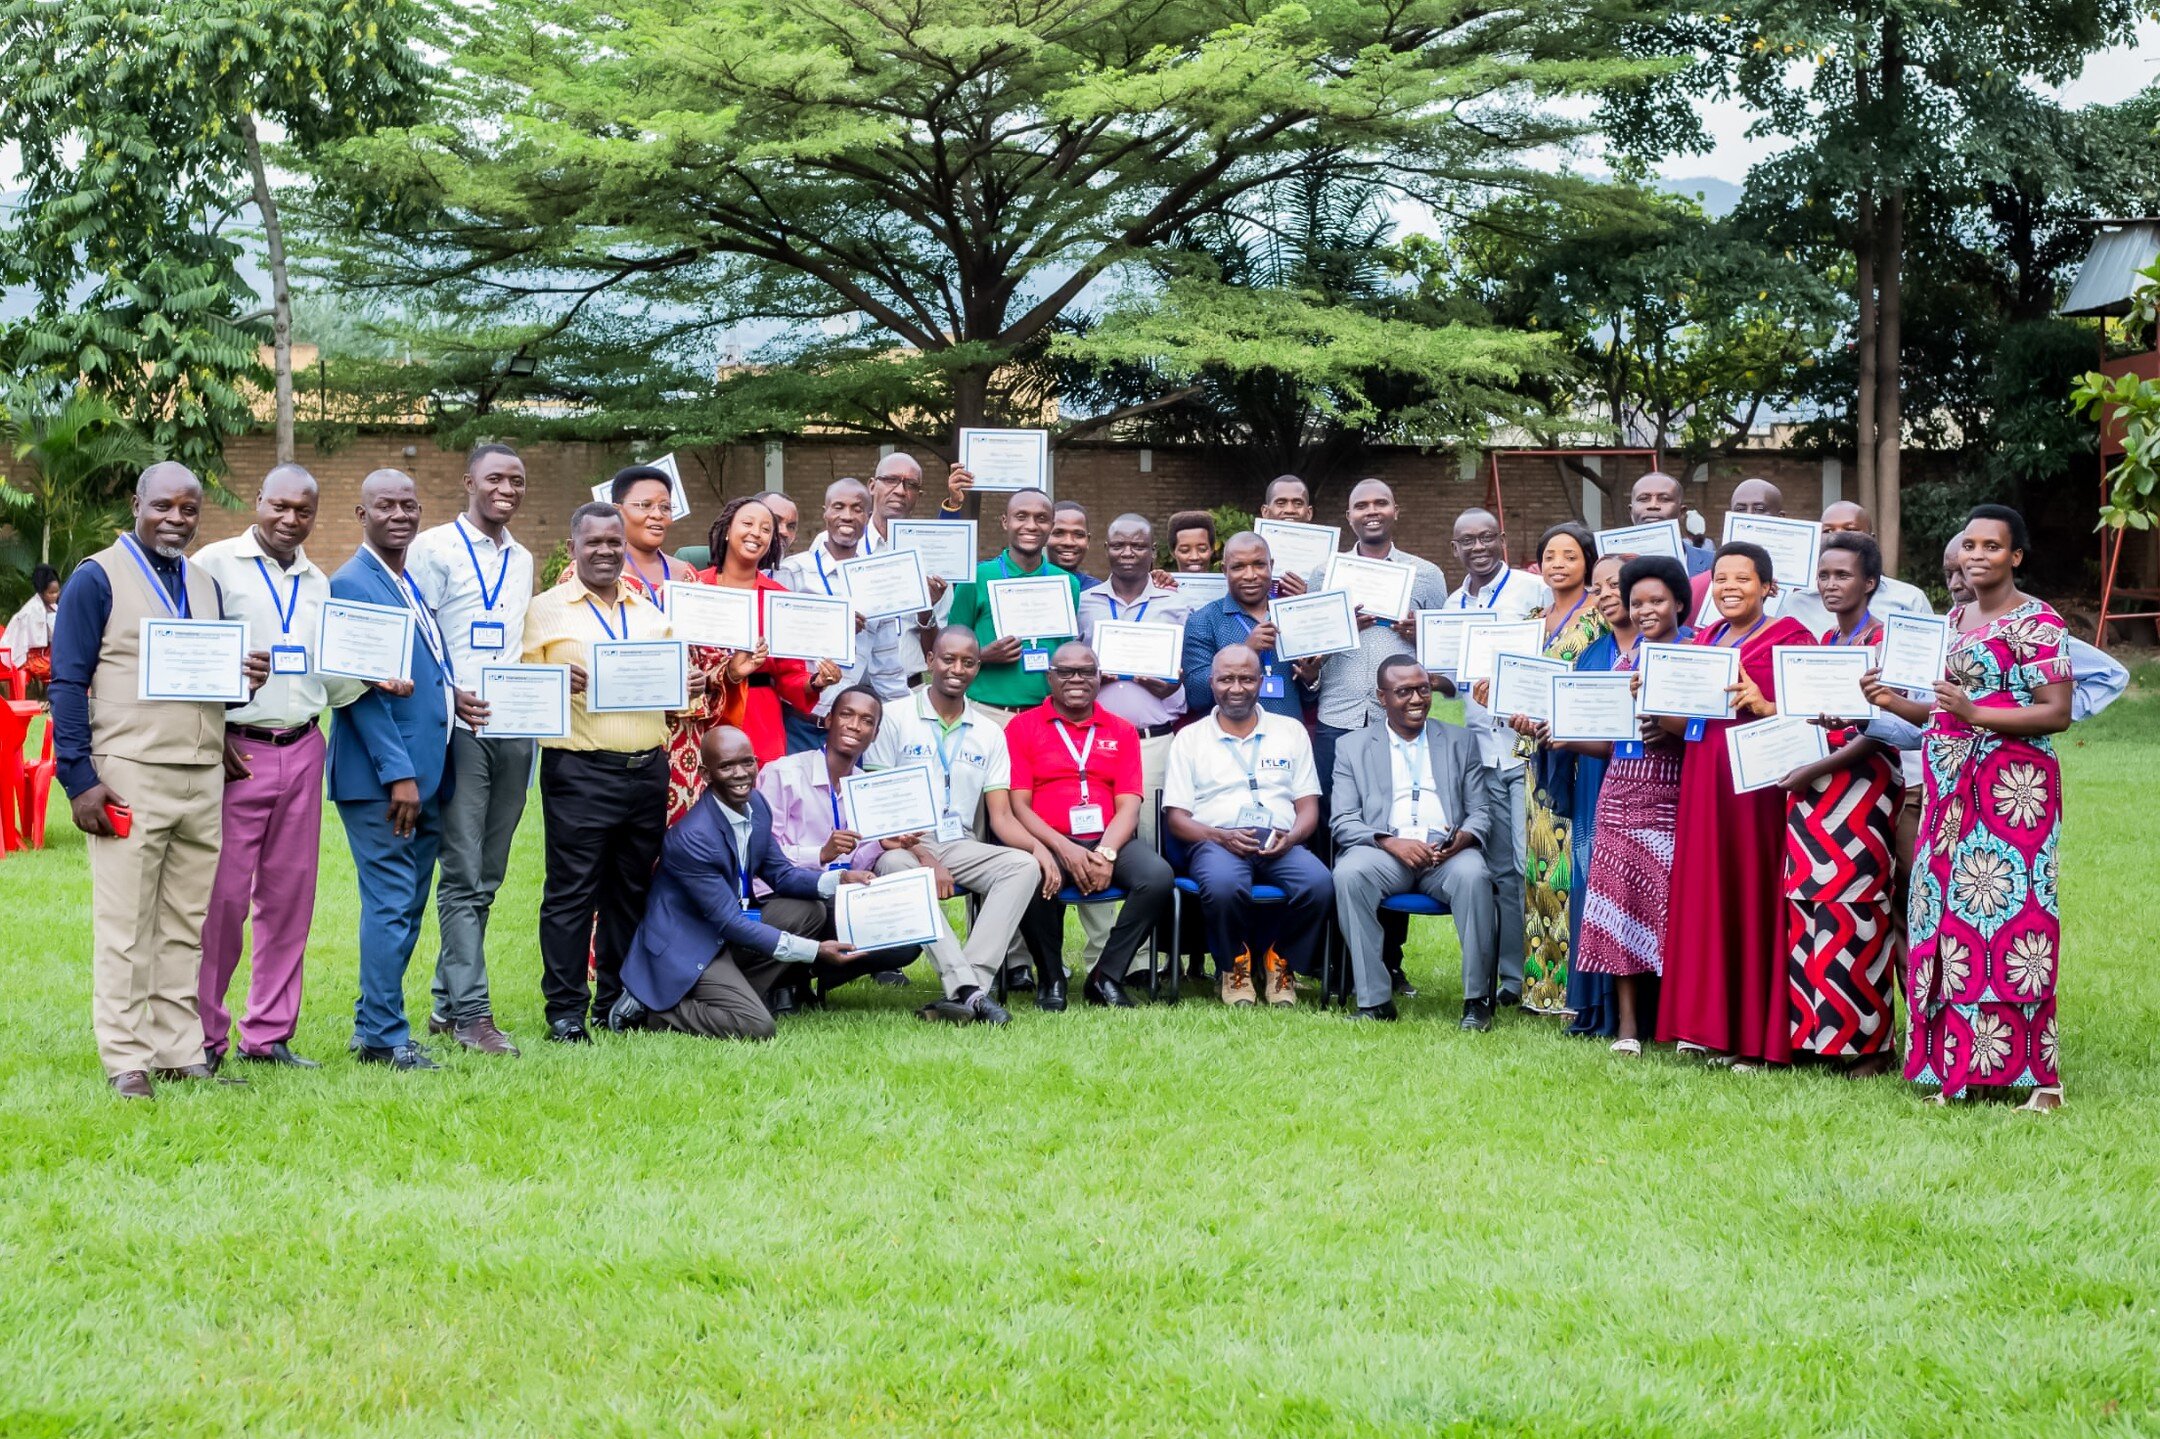 These 30 ILI Alumni 🎓 recently experienced History Makers Training in Burundi 🇧🇮. They graduated with a high expectation to multiply their leadership and train another 1,020 leaders in the next 90 days 🙌.

Every History Makers graduate is challen